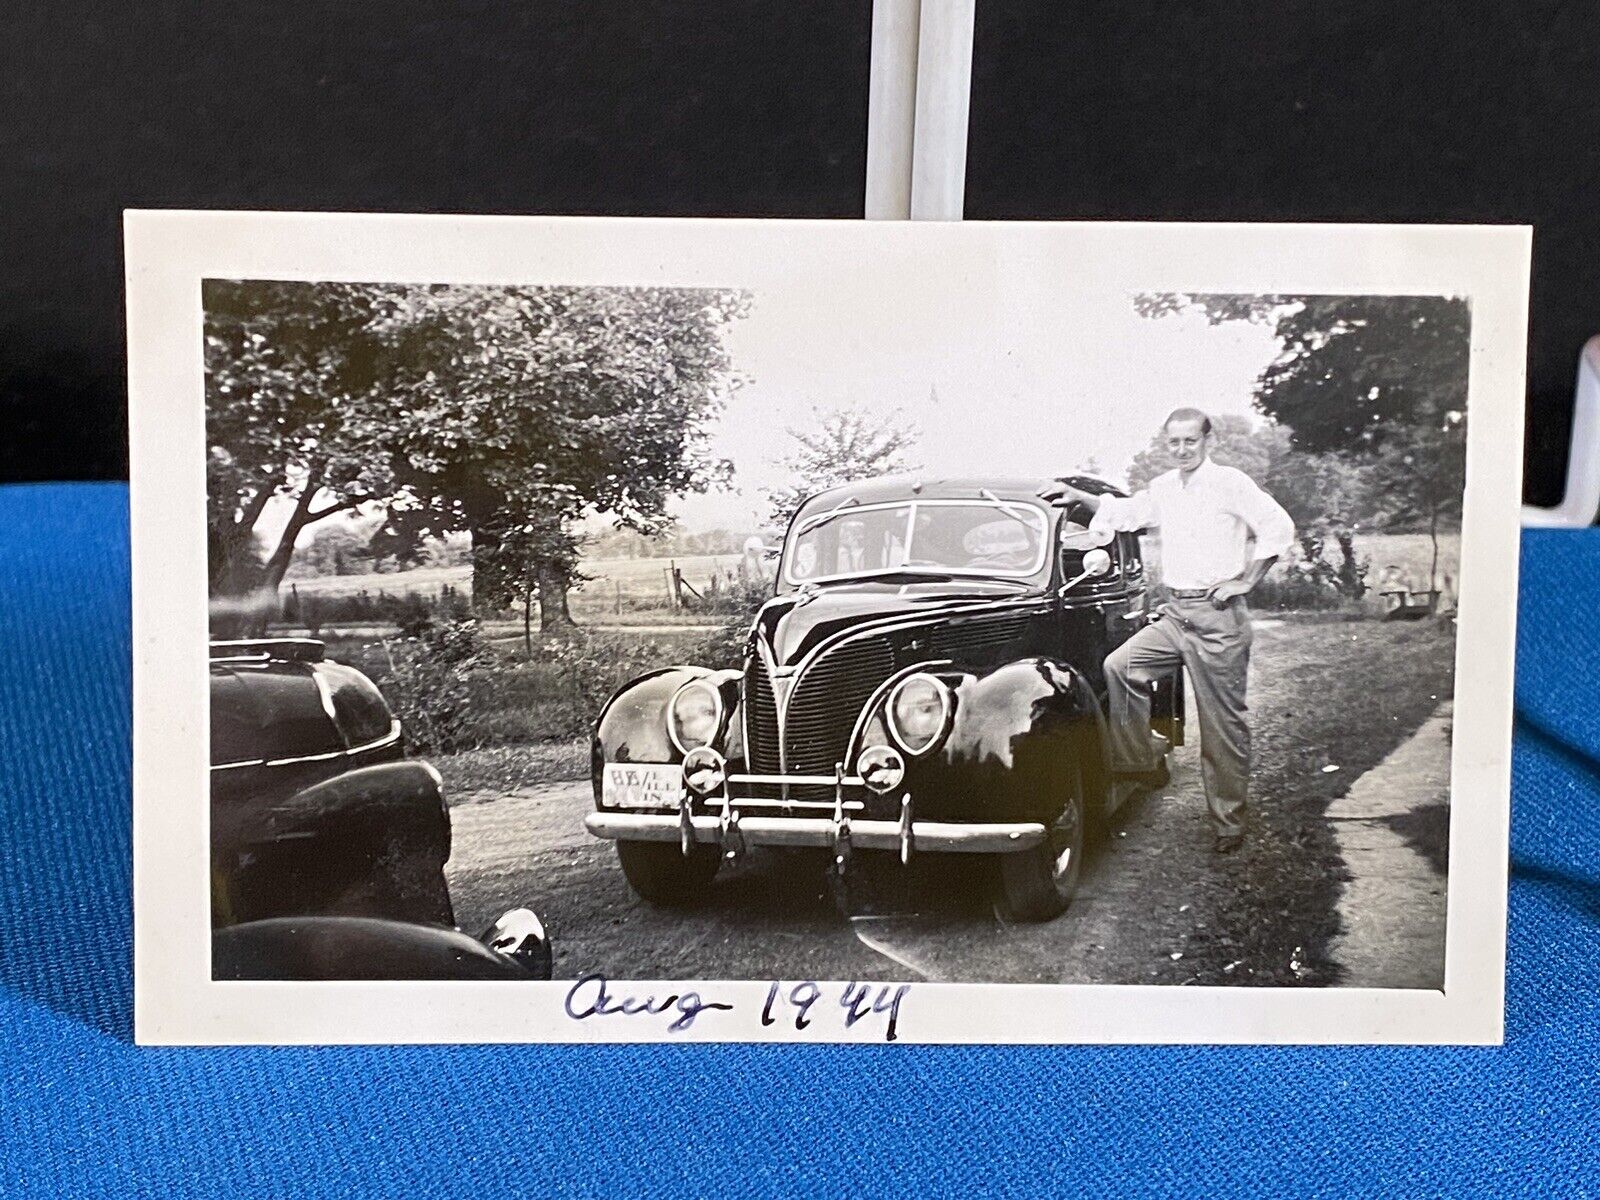 WE WILL WIN License Plate on 1938 Ford Deluxe 1944 WWII Era Vintage Photo